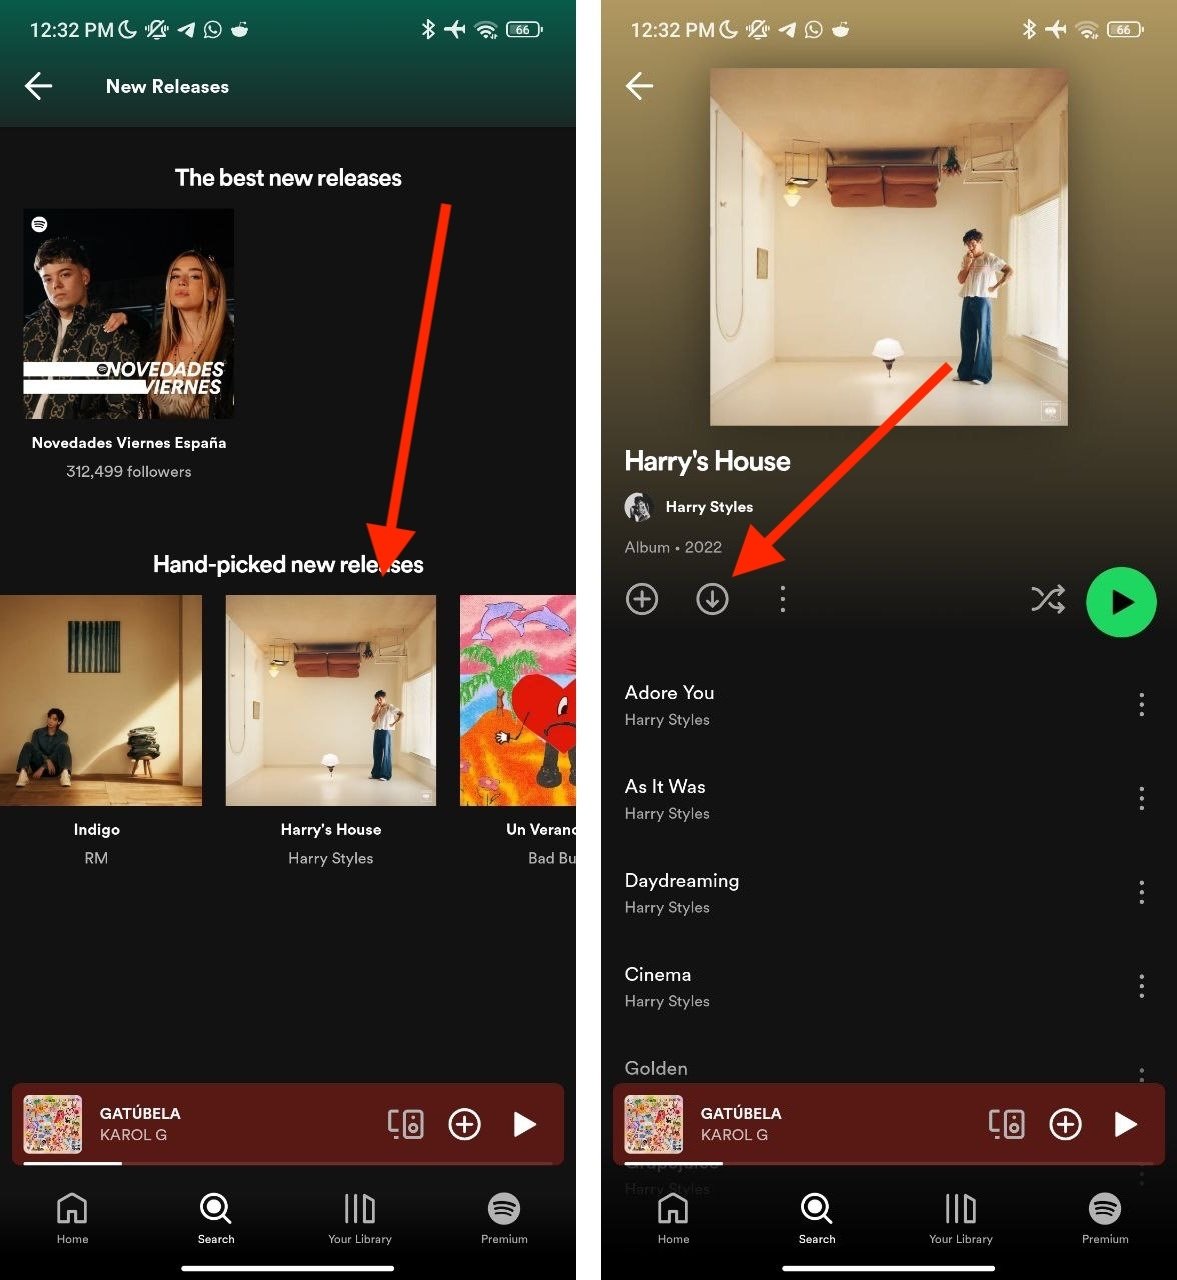 This is how easy it is to download music from Spotify